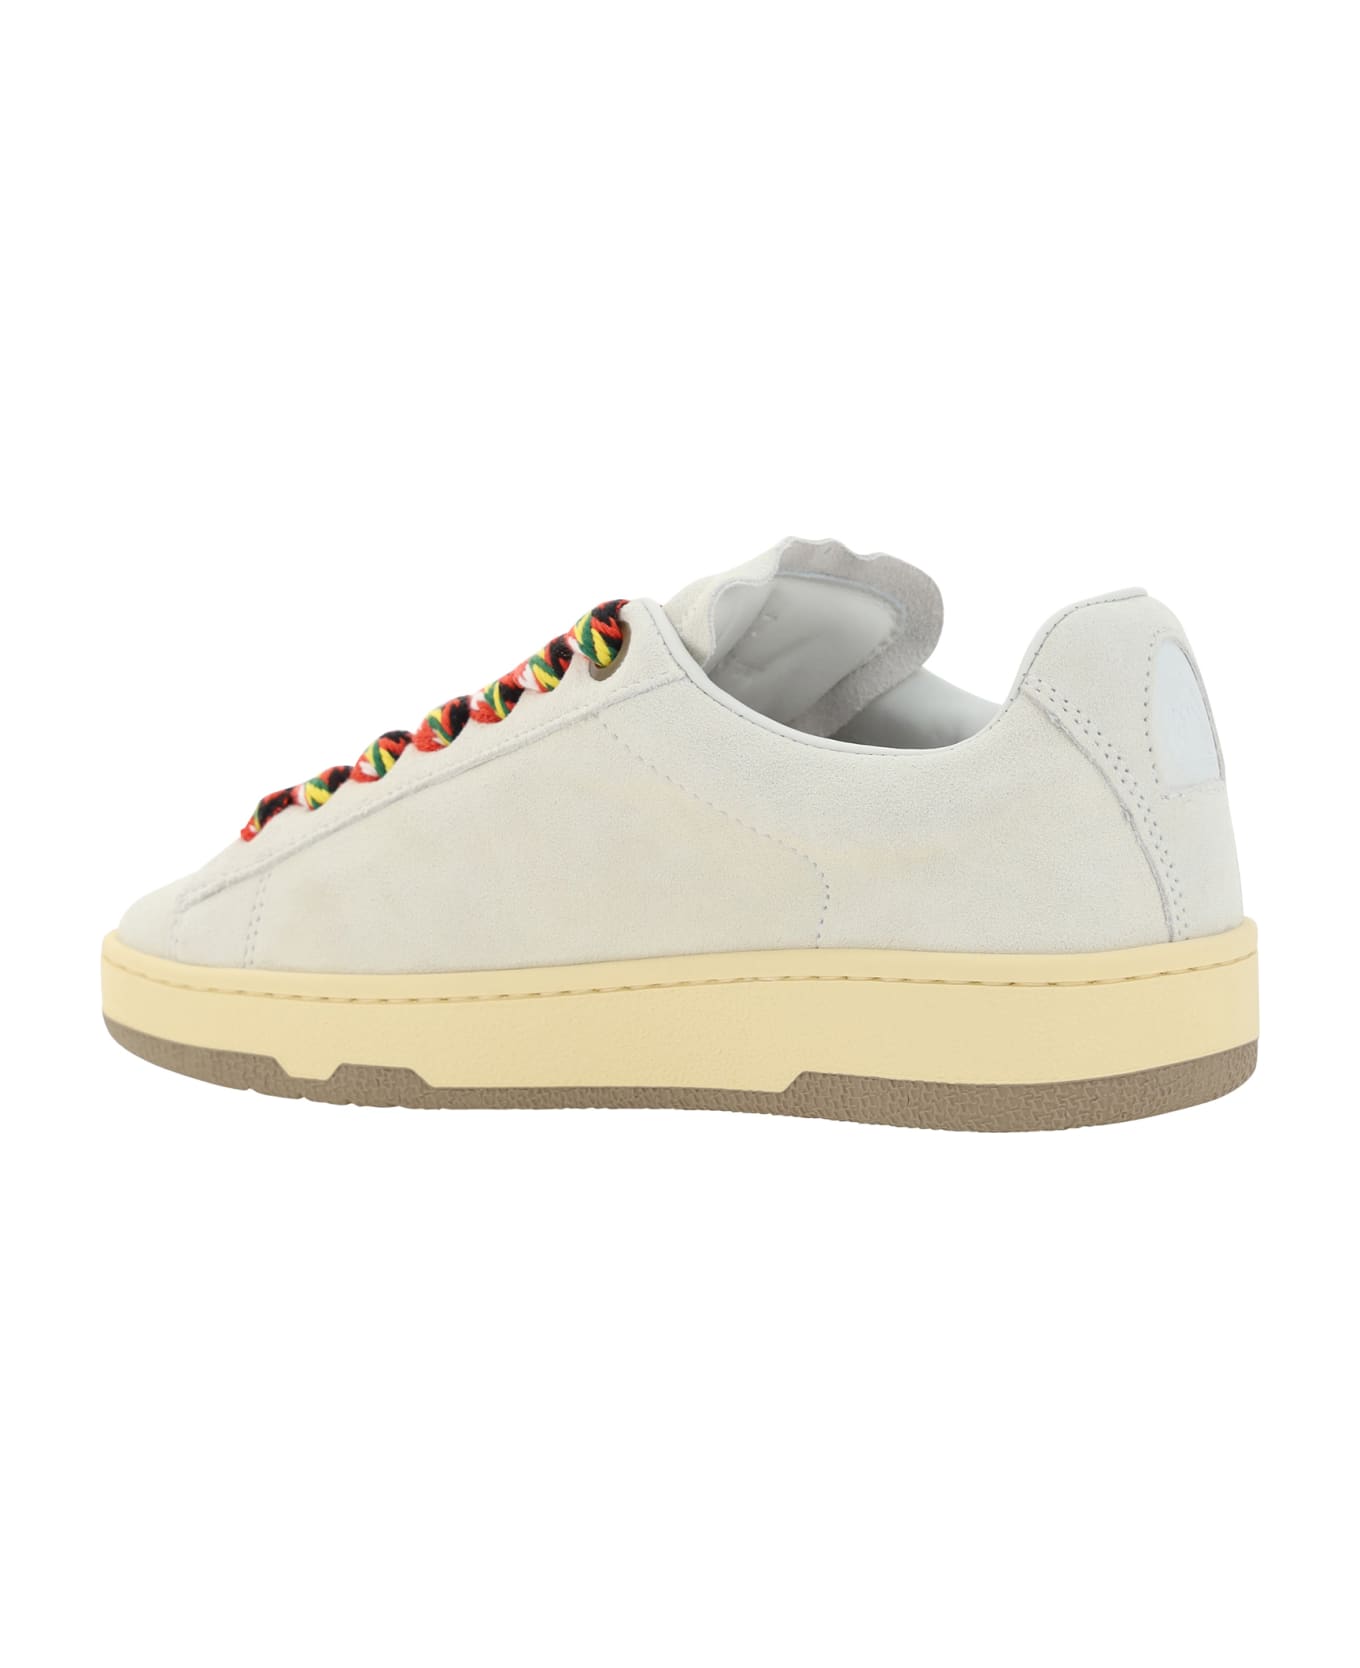 Lanvin Curb Sneakers - White